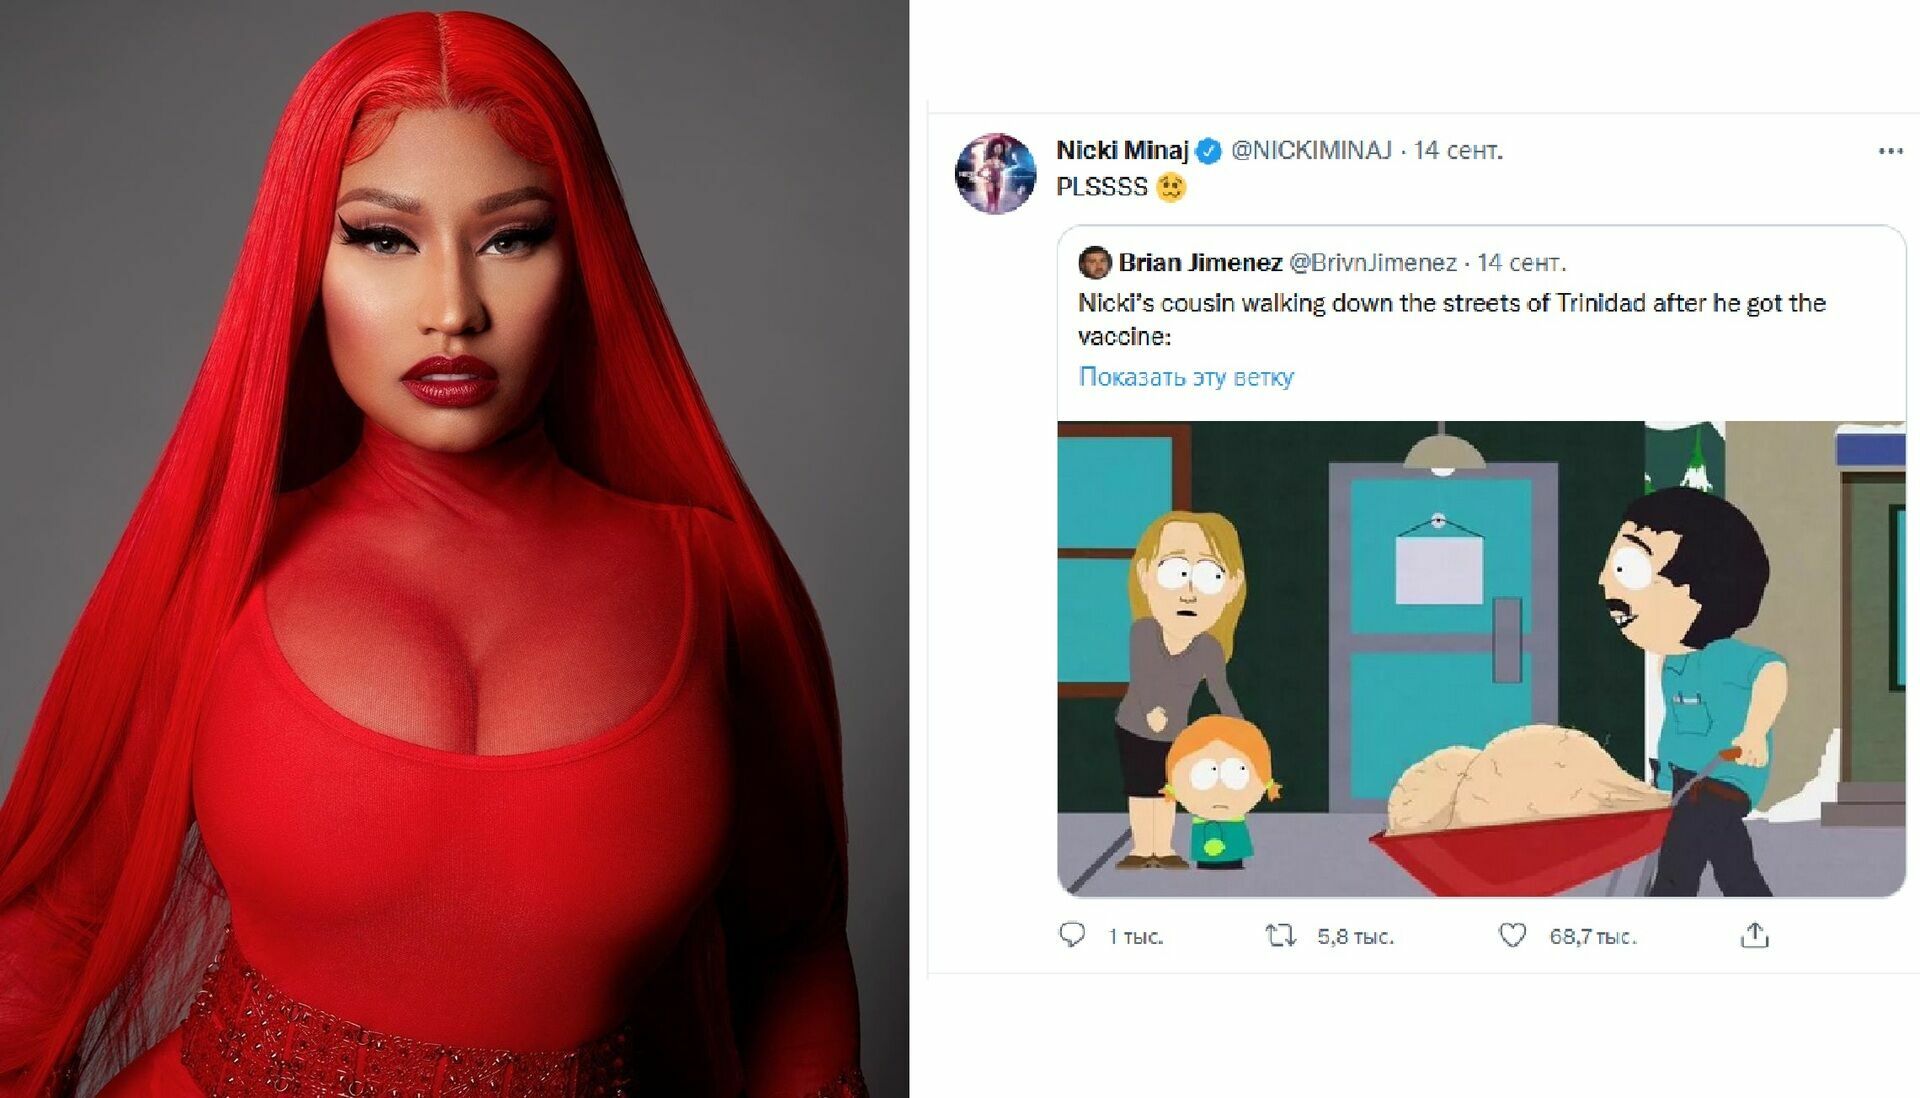 The rapper Minaj got United States all riled up with a tweet about impotence after vaccination